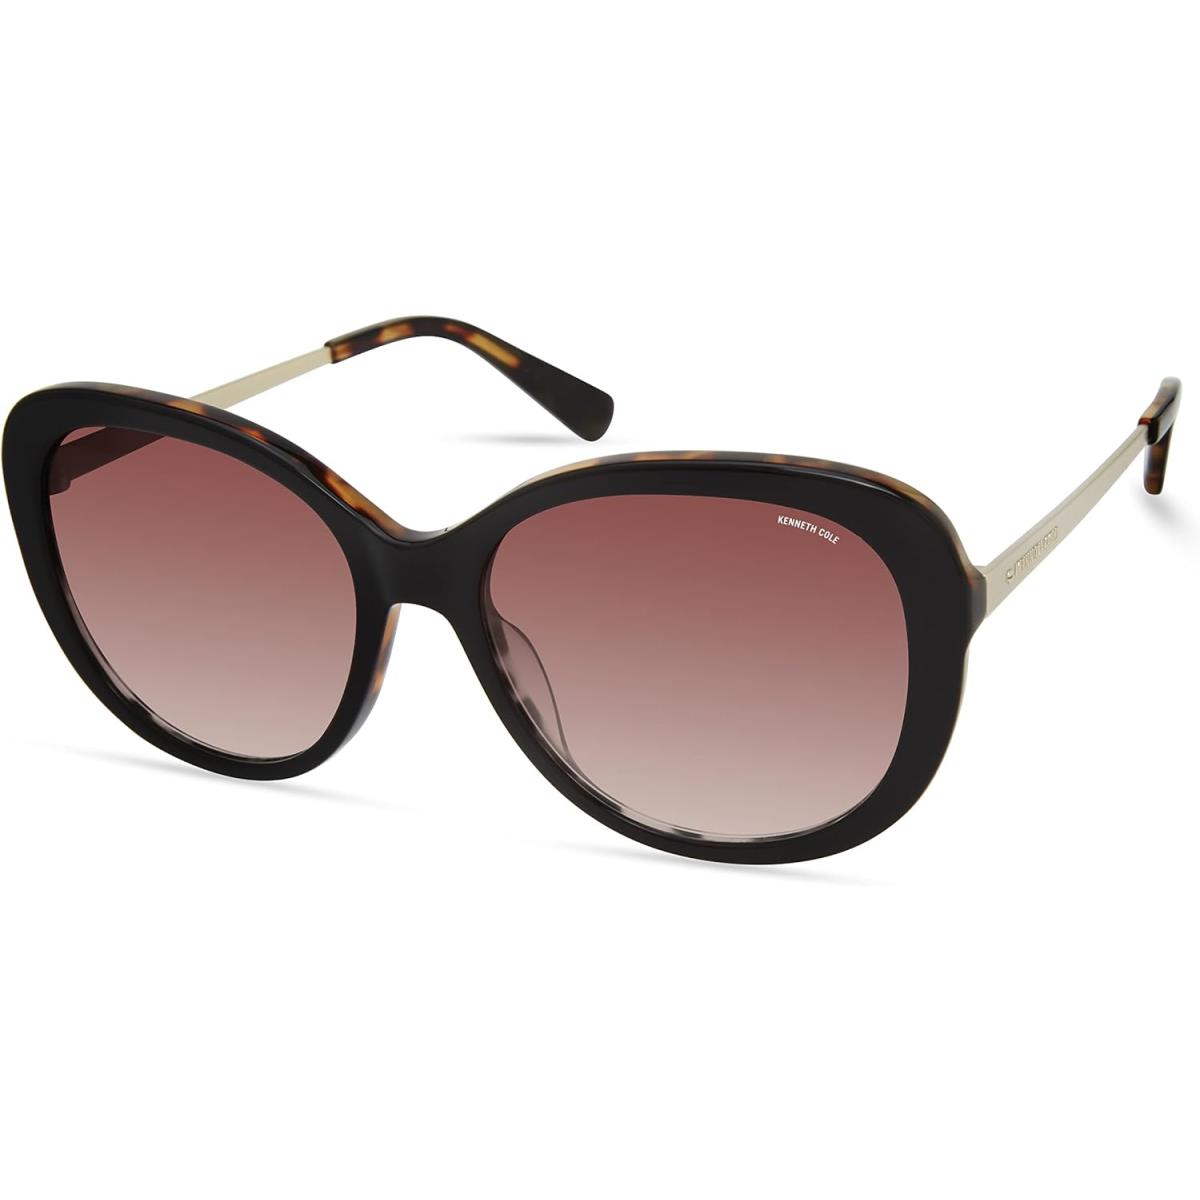 Kenneth Cole Women`s Cat Sunglasses Black/Other / Gradient Brown